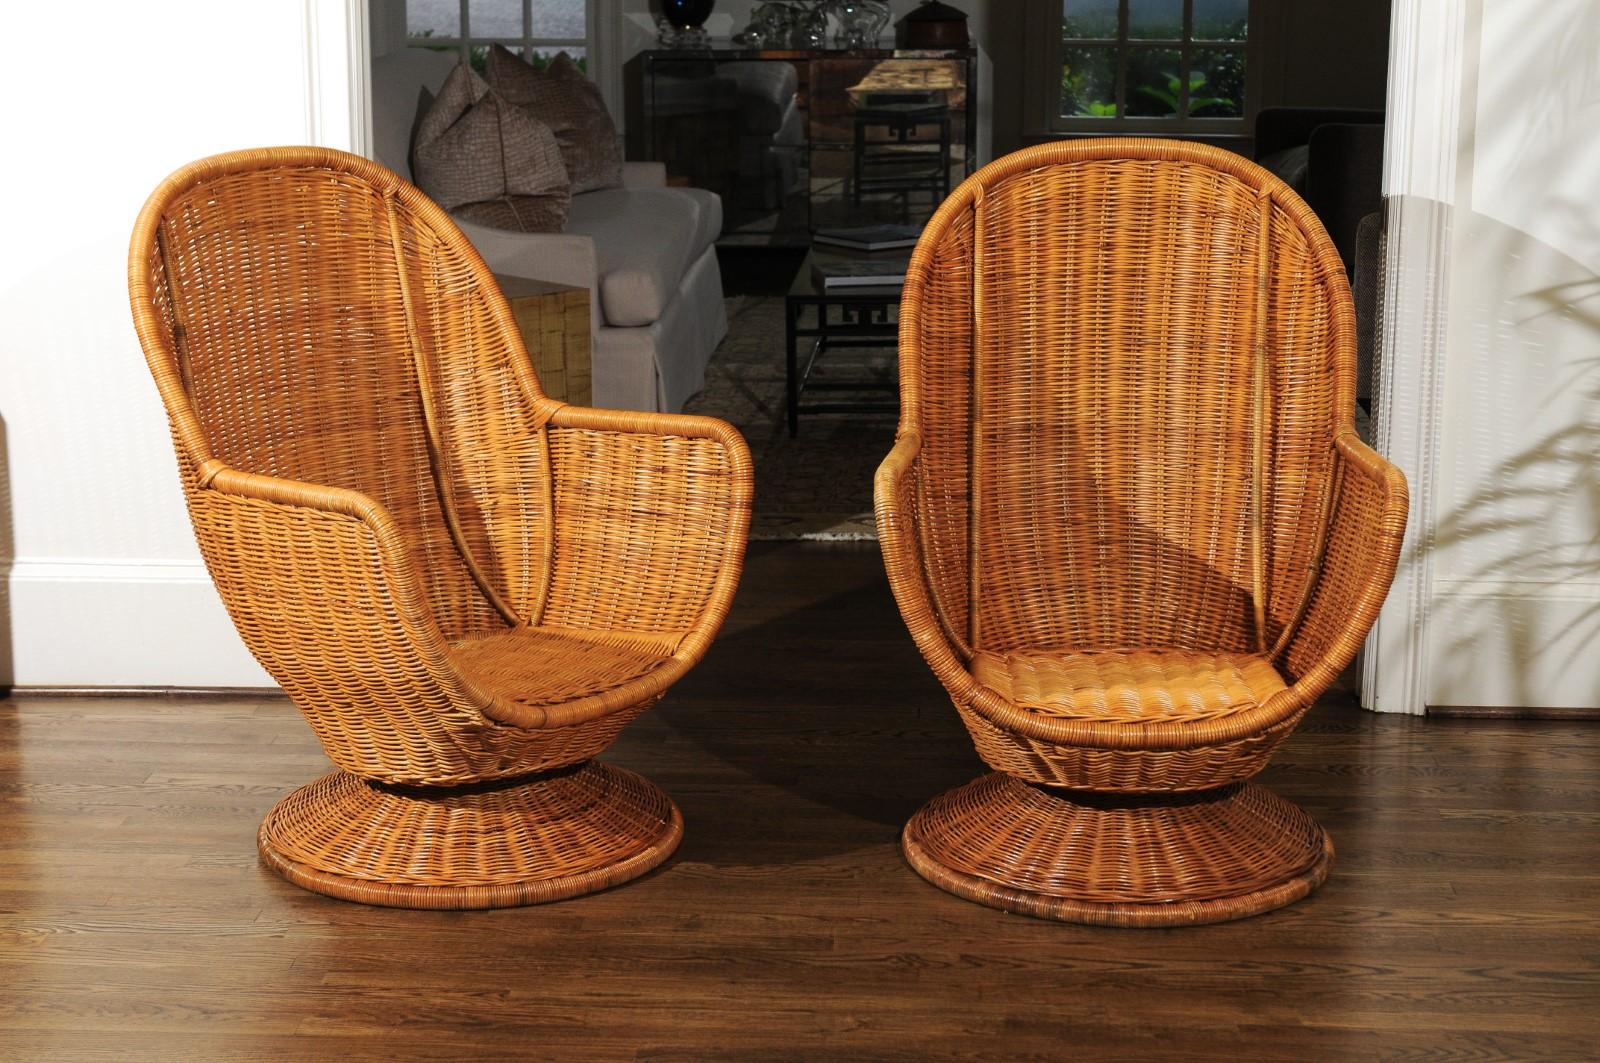 A stellar restored pair of egg style wicker swivel club or lounge chairs, circa 1975. Heavy steel frame and base veneered in woven wicker. Exceptional design, material quality and craftsmanship. The wicker has aged to absolute perfection. Important